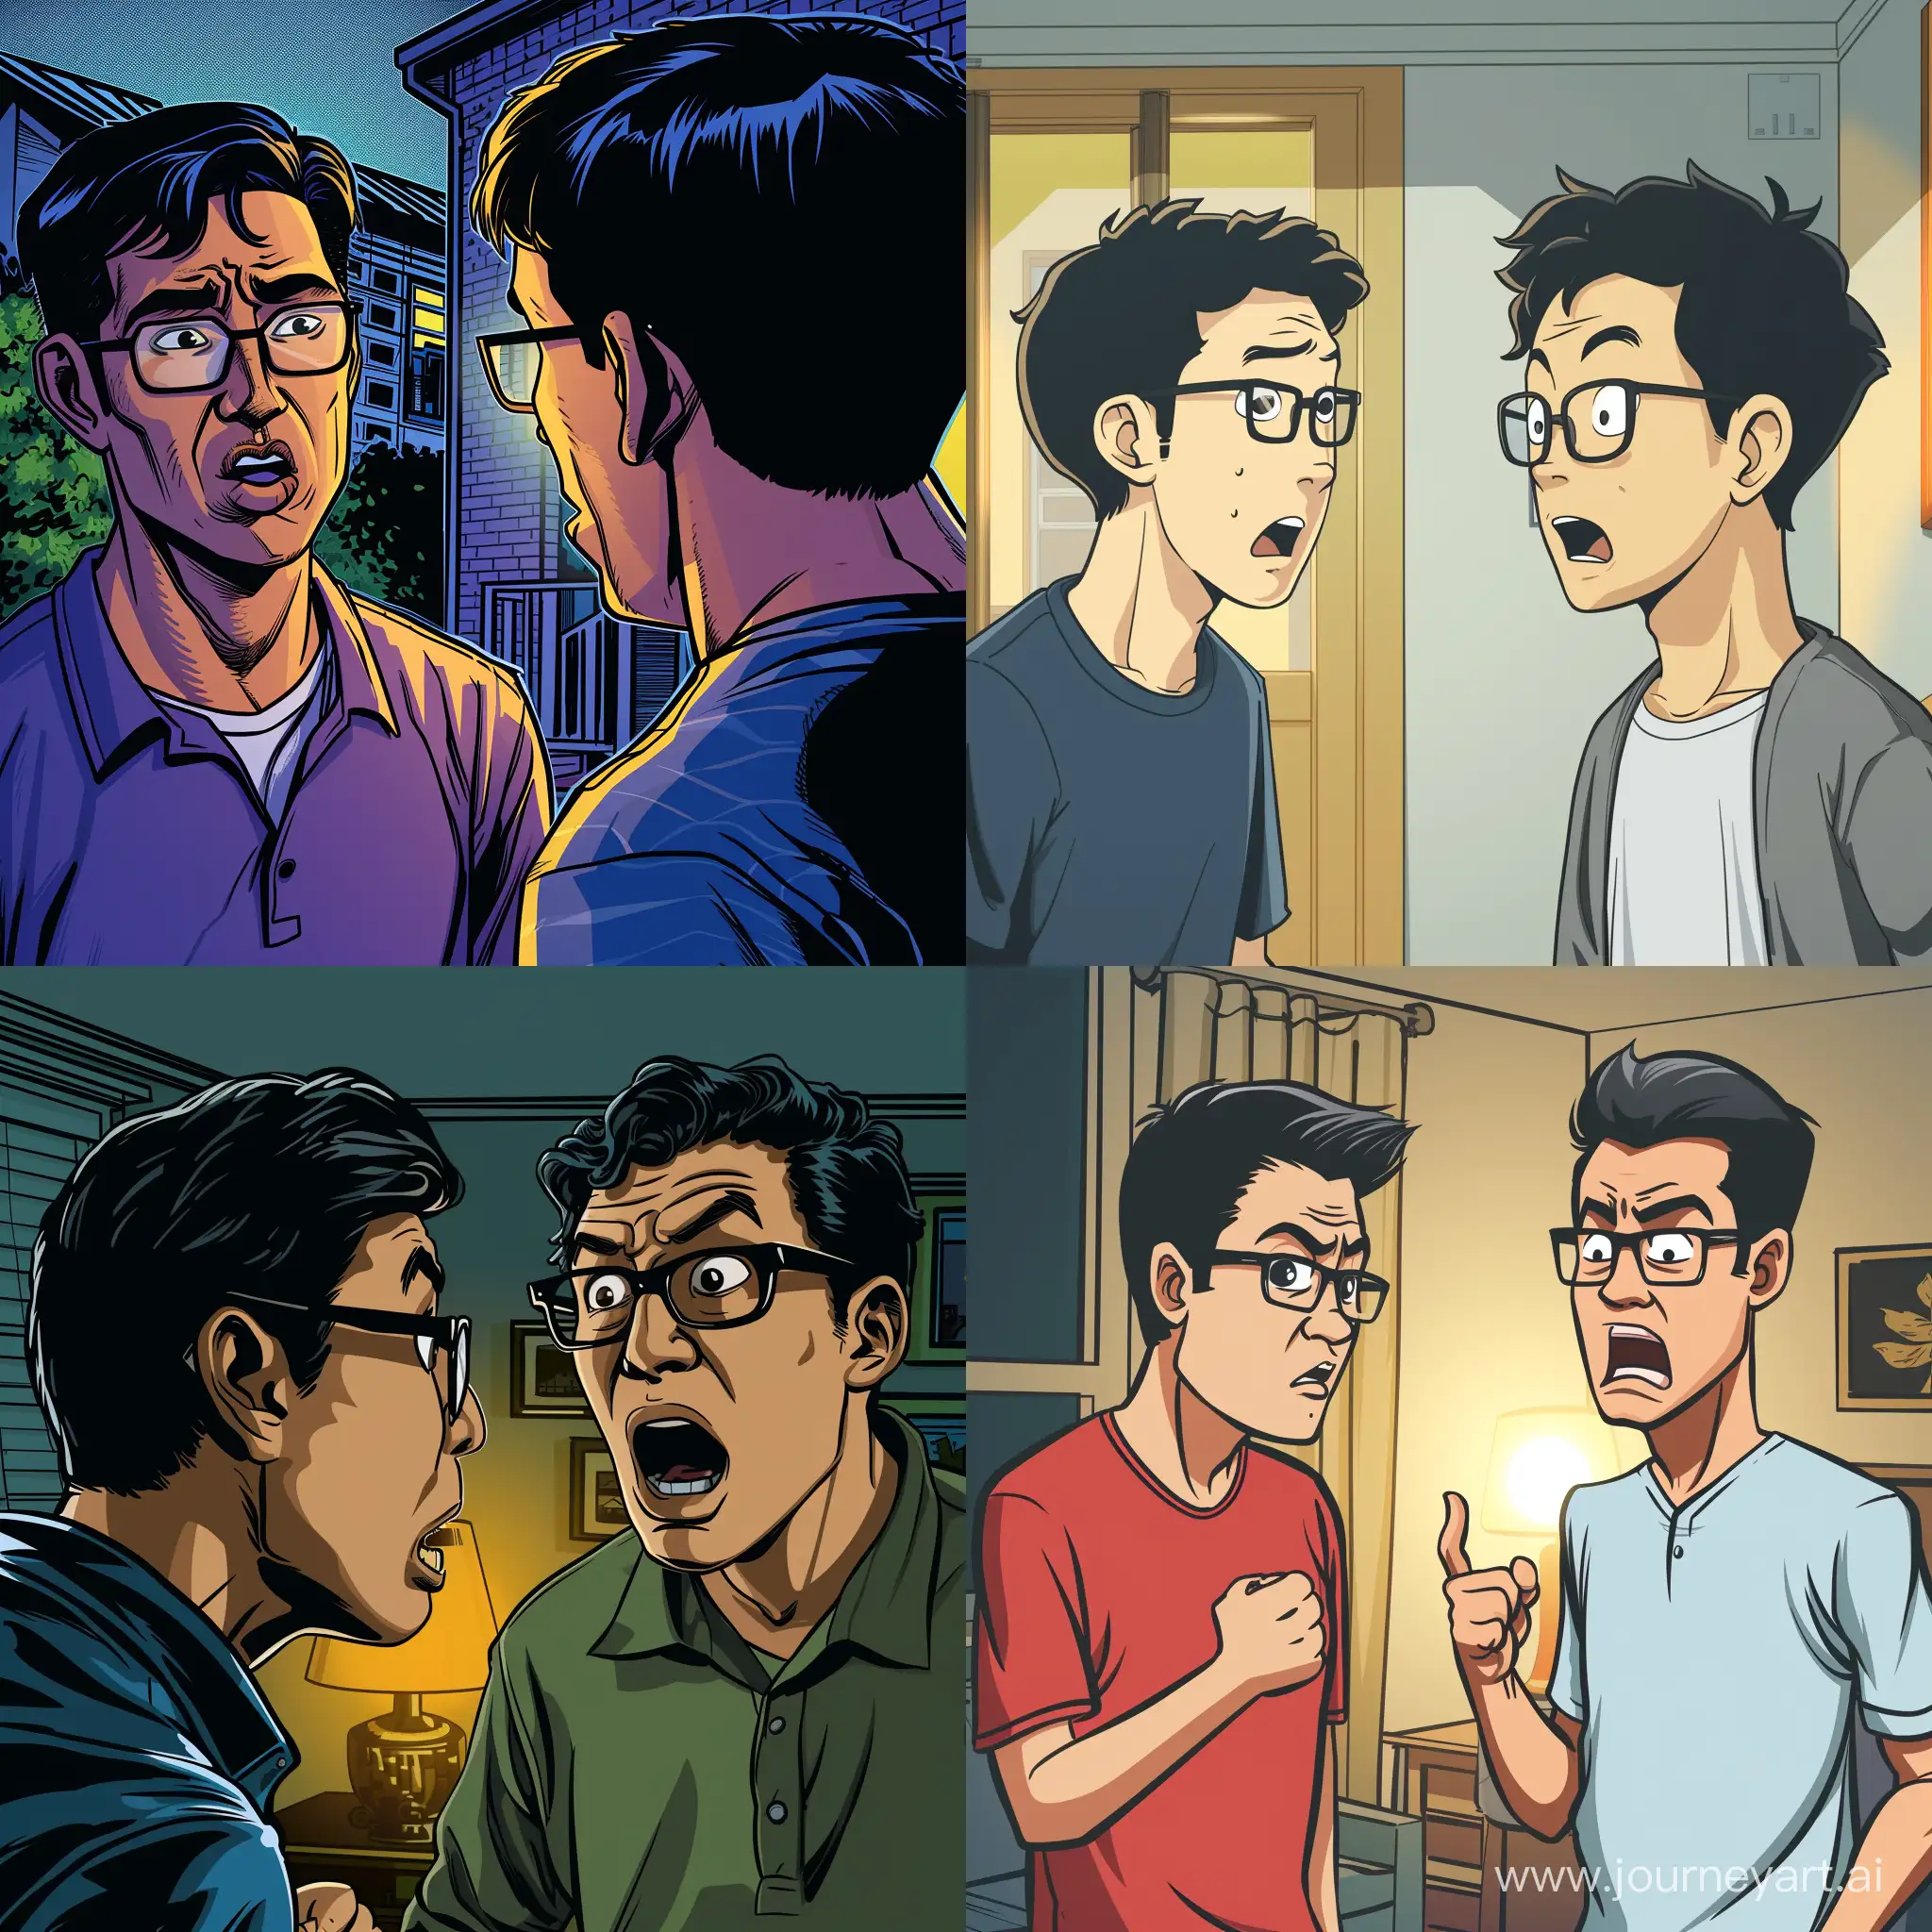 Angry-Asian-Man-Complaining-to-Neighbor-in-Glasses-Near-Apartment